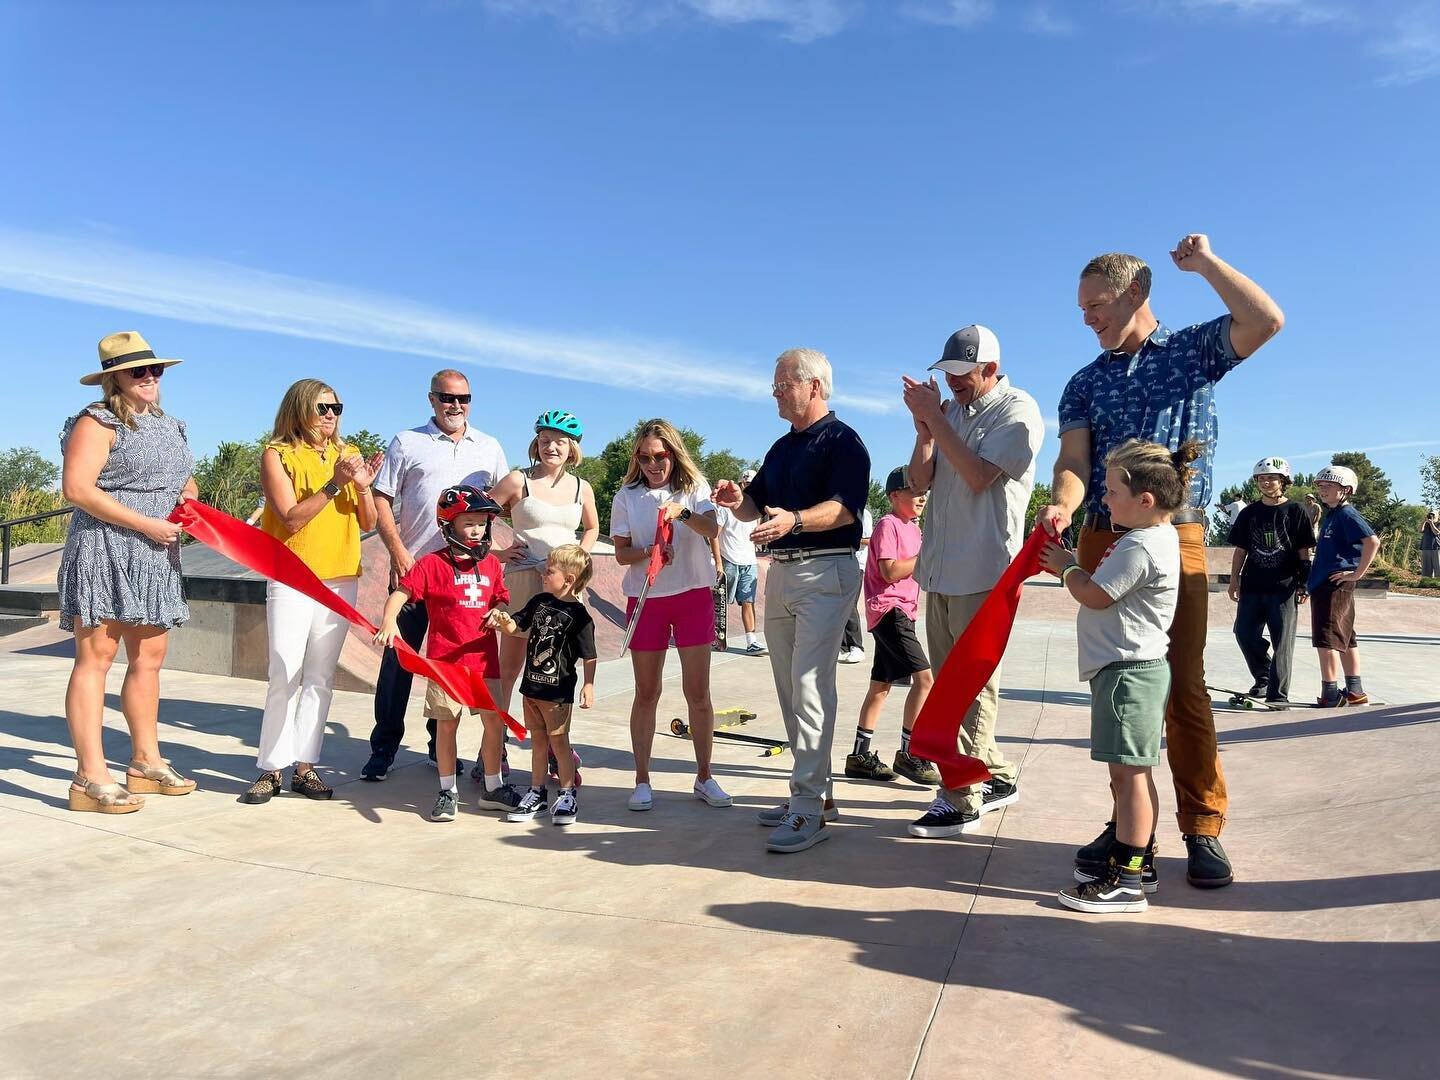 There's nothing more important to me than the kids in this community. Today, with the ribbon cutting of Molenaar Skate Park, Boise just got a whole lot brighter for every kid that skates, rolls, and scoots!

Kids in South Boise now have one of the be